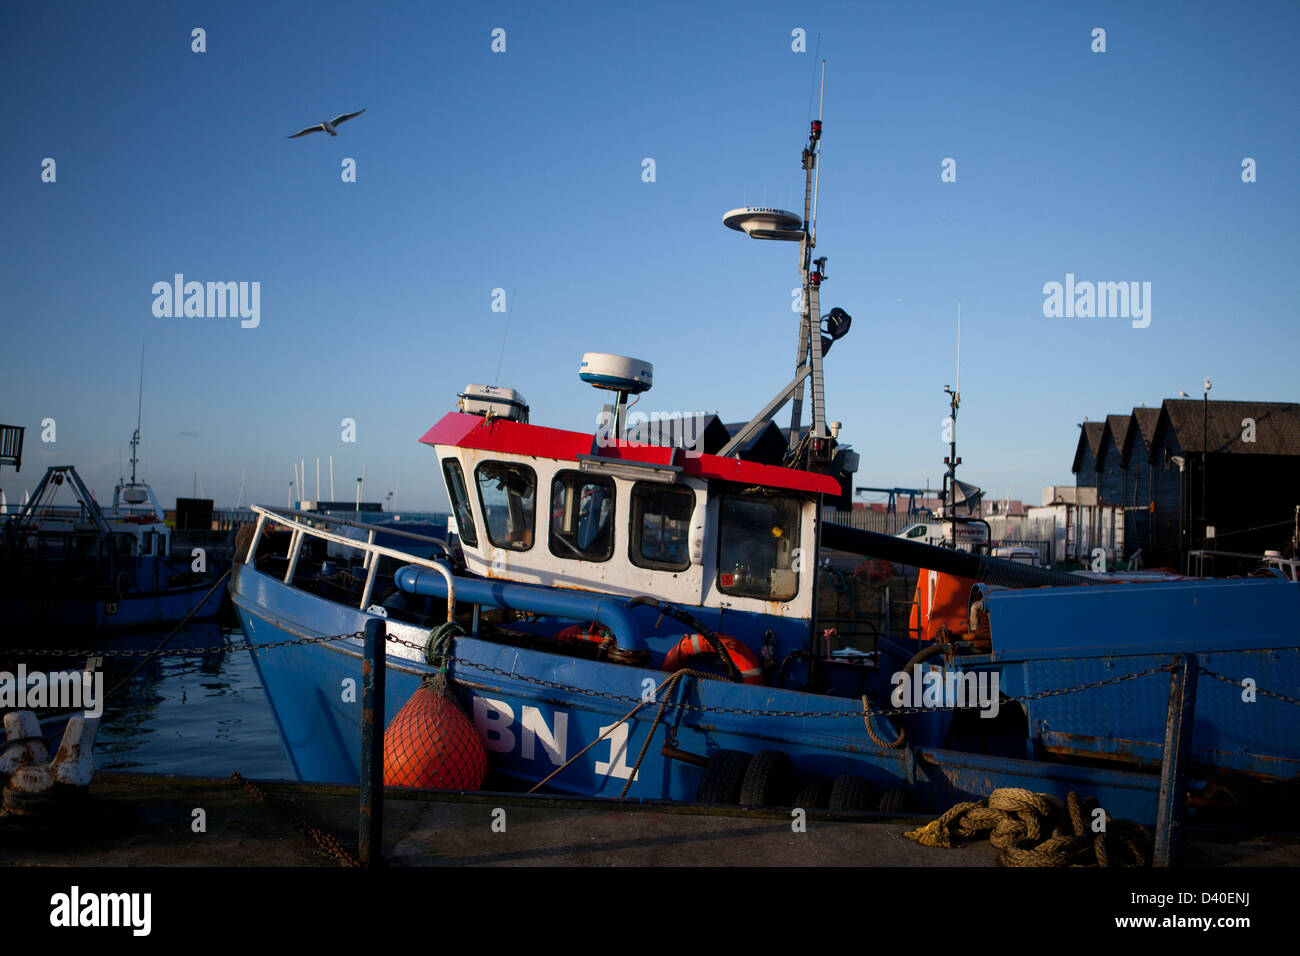 A fishing boat at the seaside town of Whitstable, Whitstable Harbour in Kent Stock Photo